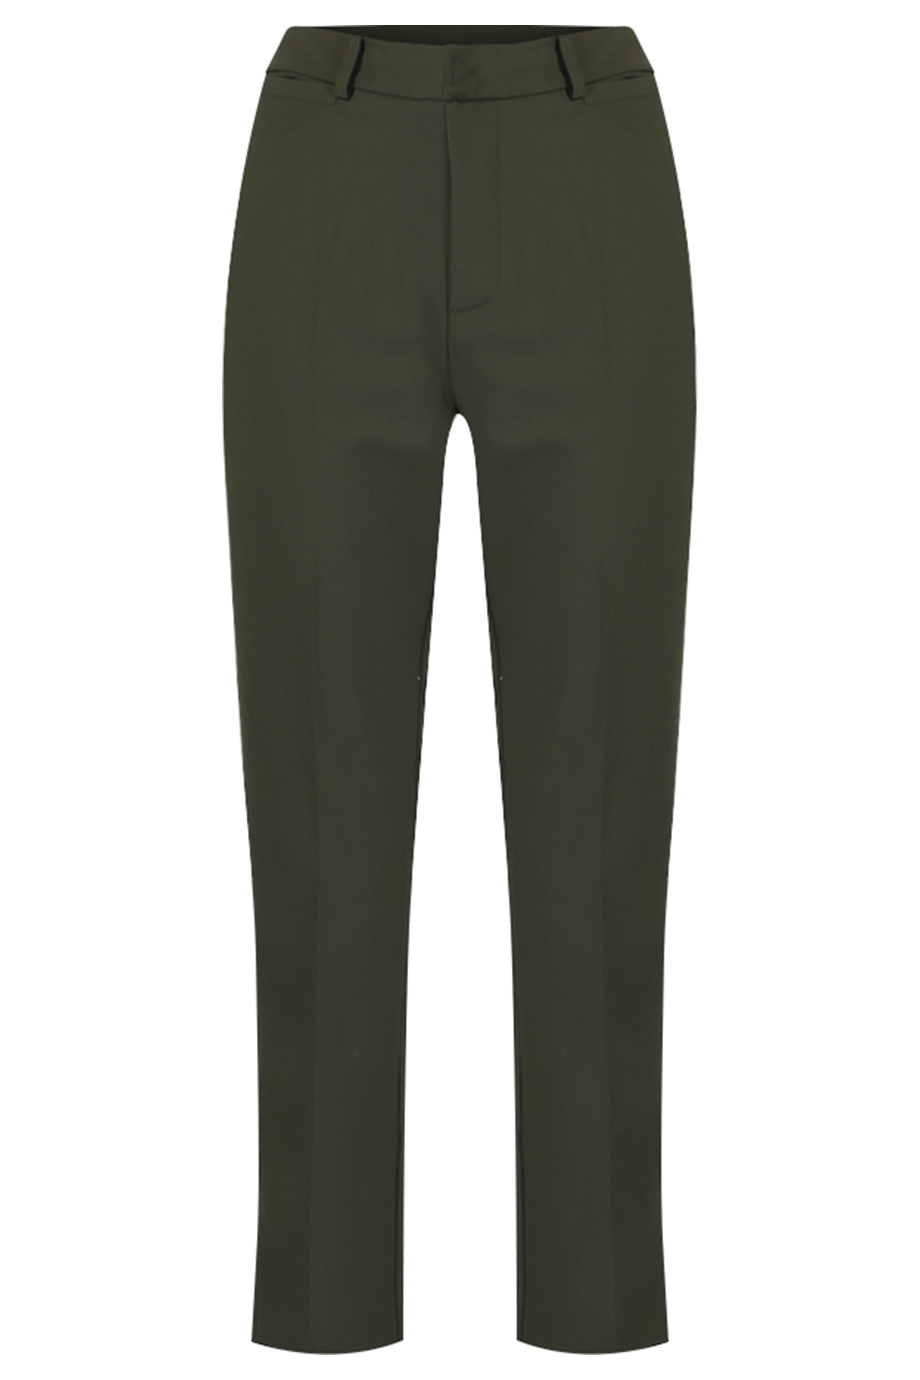 Quần công sở  Collette High-waisted Suit Pants/ Moss Green 2187